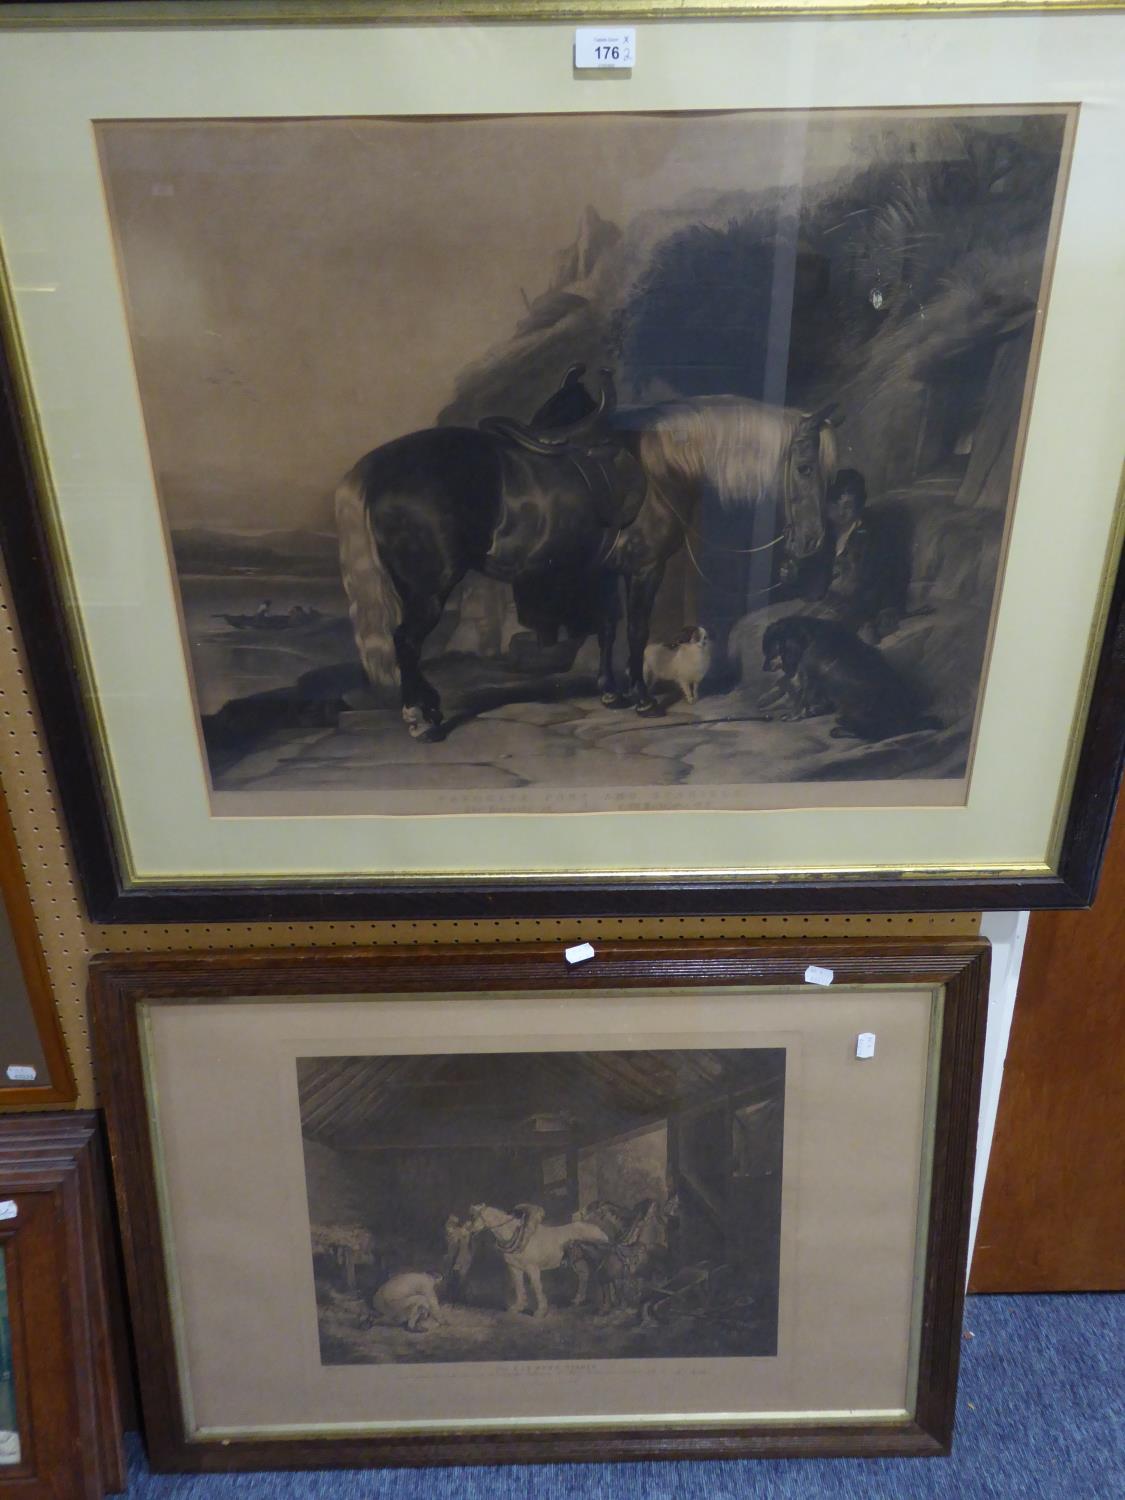 FAVORITE PONY AND SPANIELS BY EDWIN LANDSEER, ENGRAVED BY THOMAS LANDSEER AND ANOTHER FARMERS AND